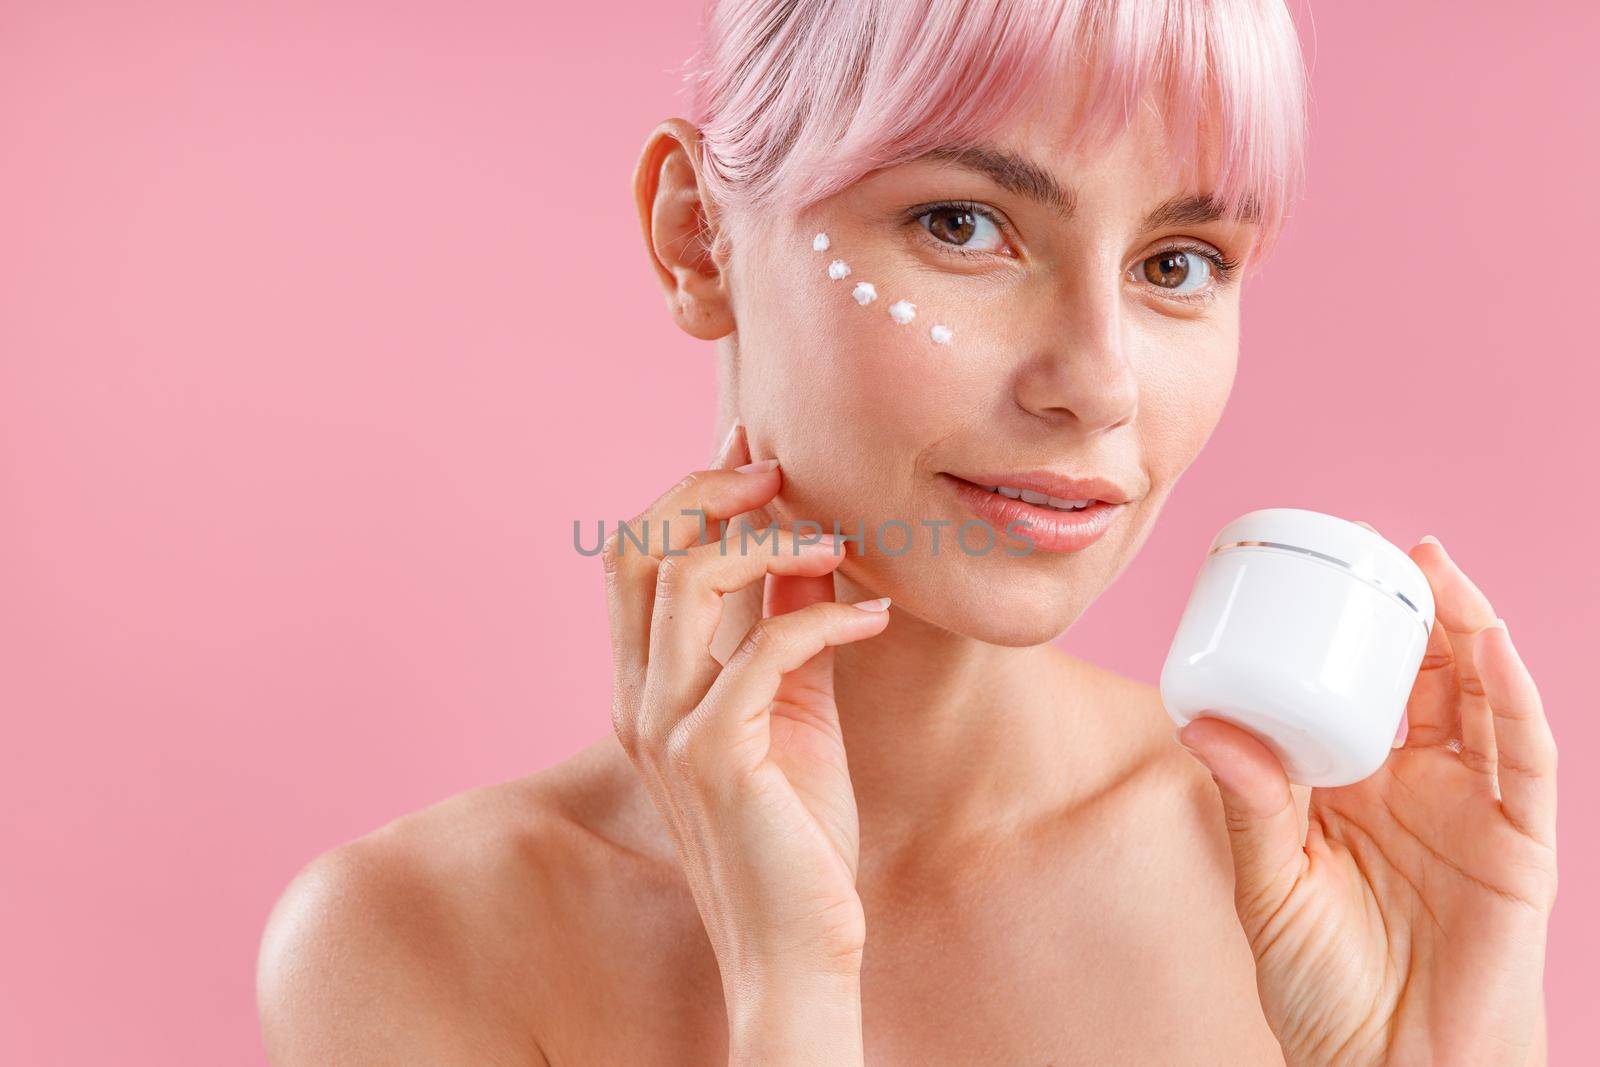 Portrait of beautiful woman with pink hair and face cream applied on her skin like dots looking at camera, holding cream in white jar isolated over pink background. Beauty, spa, skin care concept